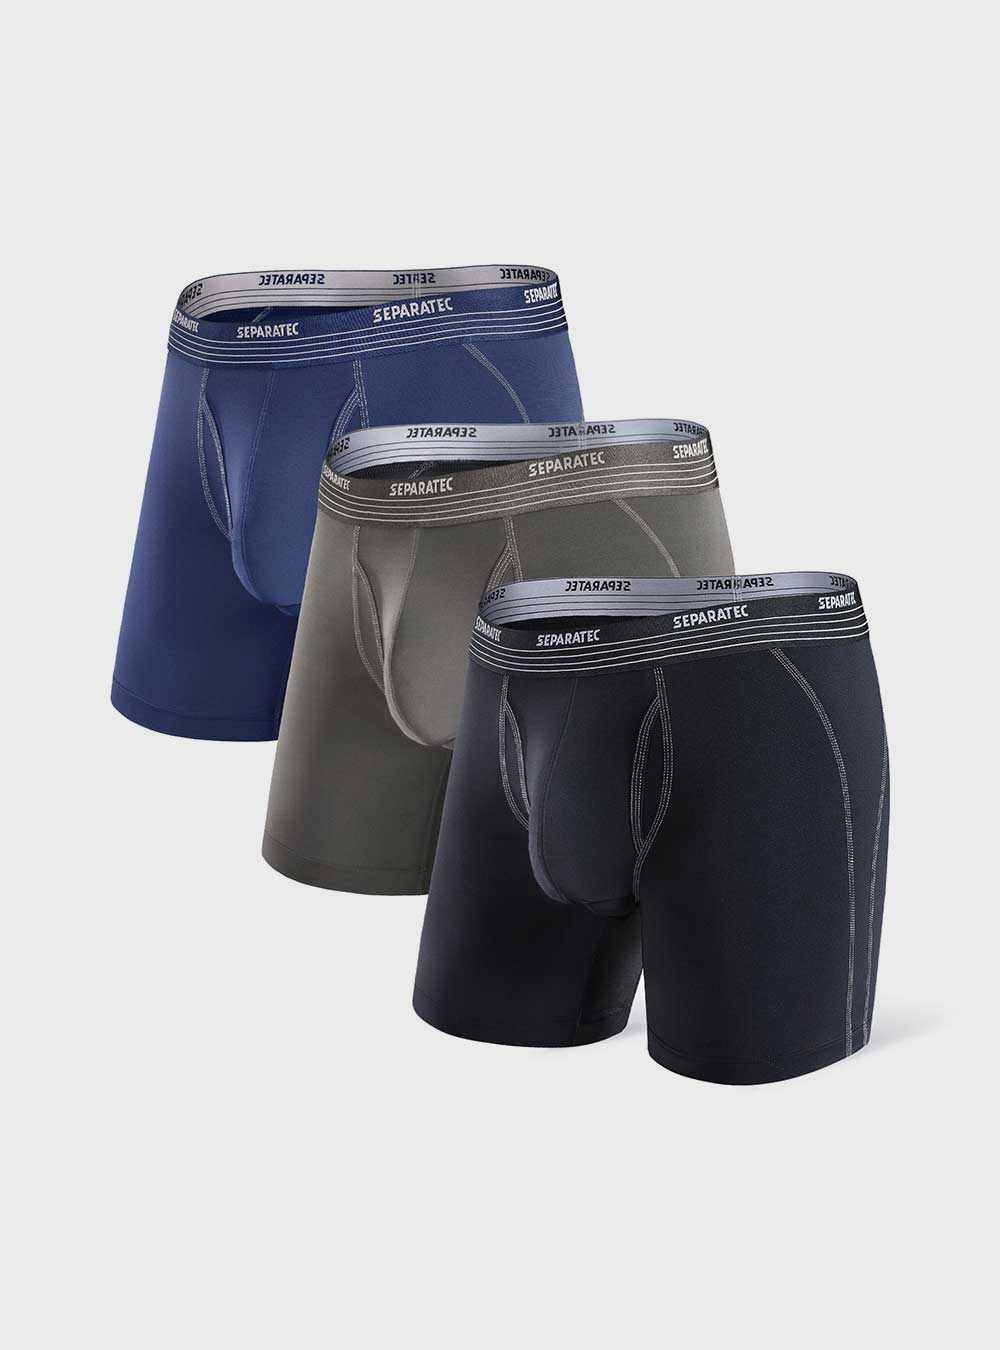 Quick Dry Open Fly Functional Athletic Boxer Briefs 3 Pack